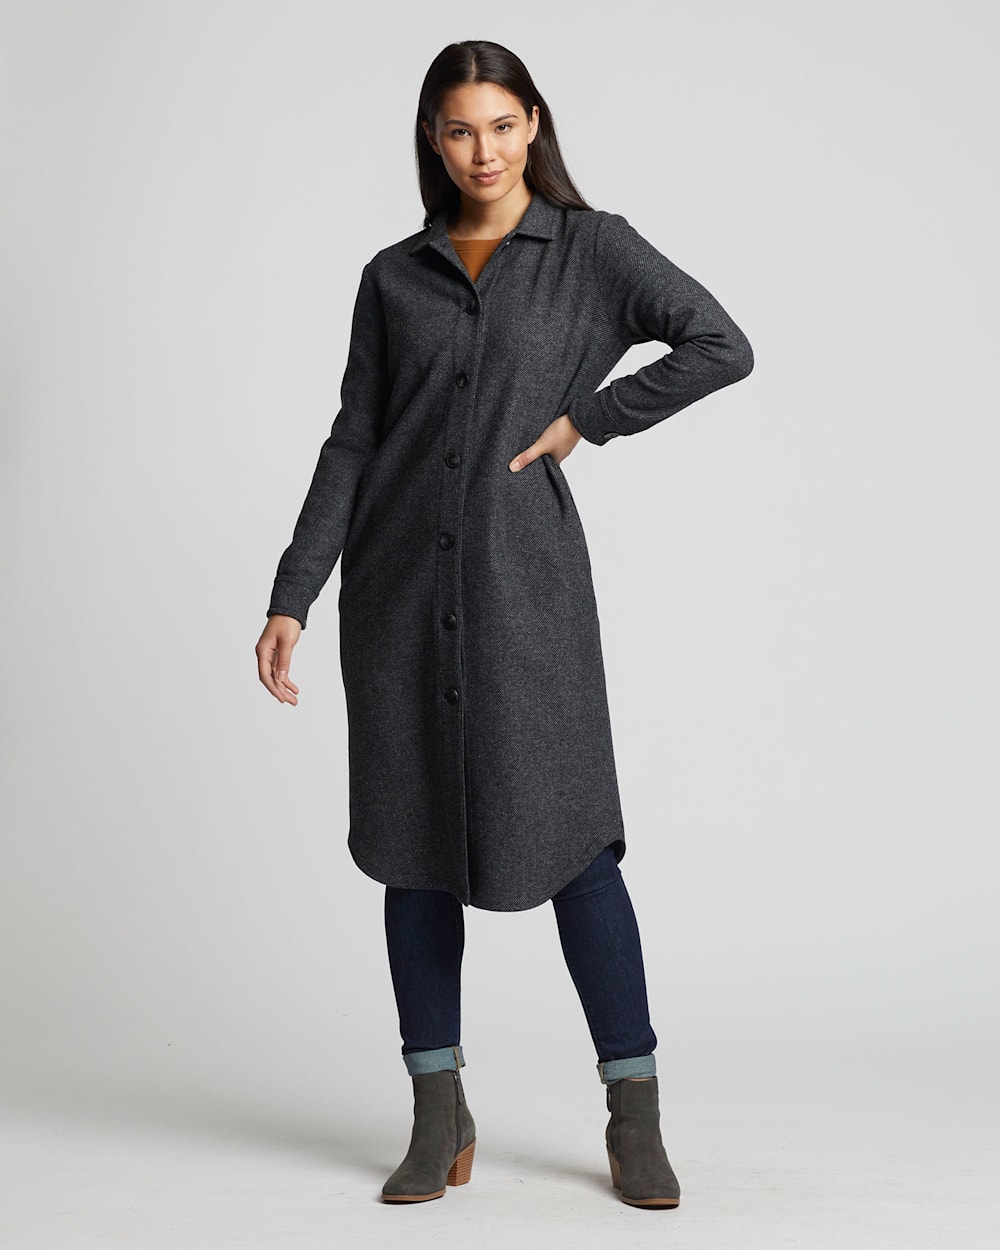 WOMEN'S WOOL TWILL DUSTER SHIRT IN GREY MIX/BLACK image number 1